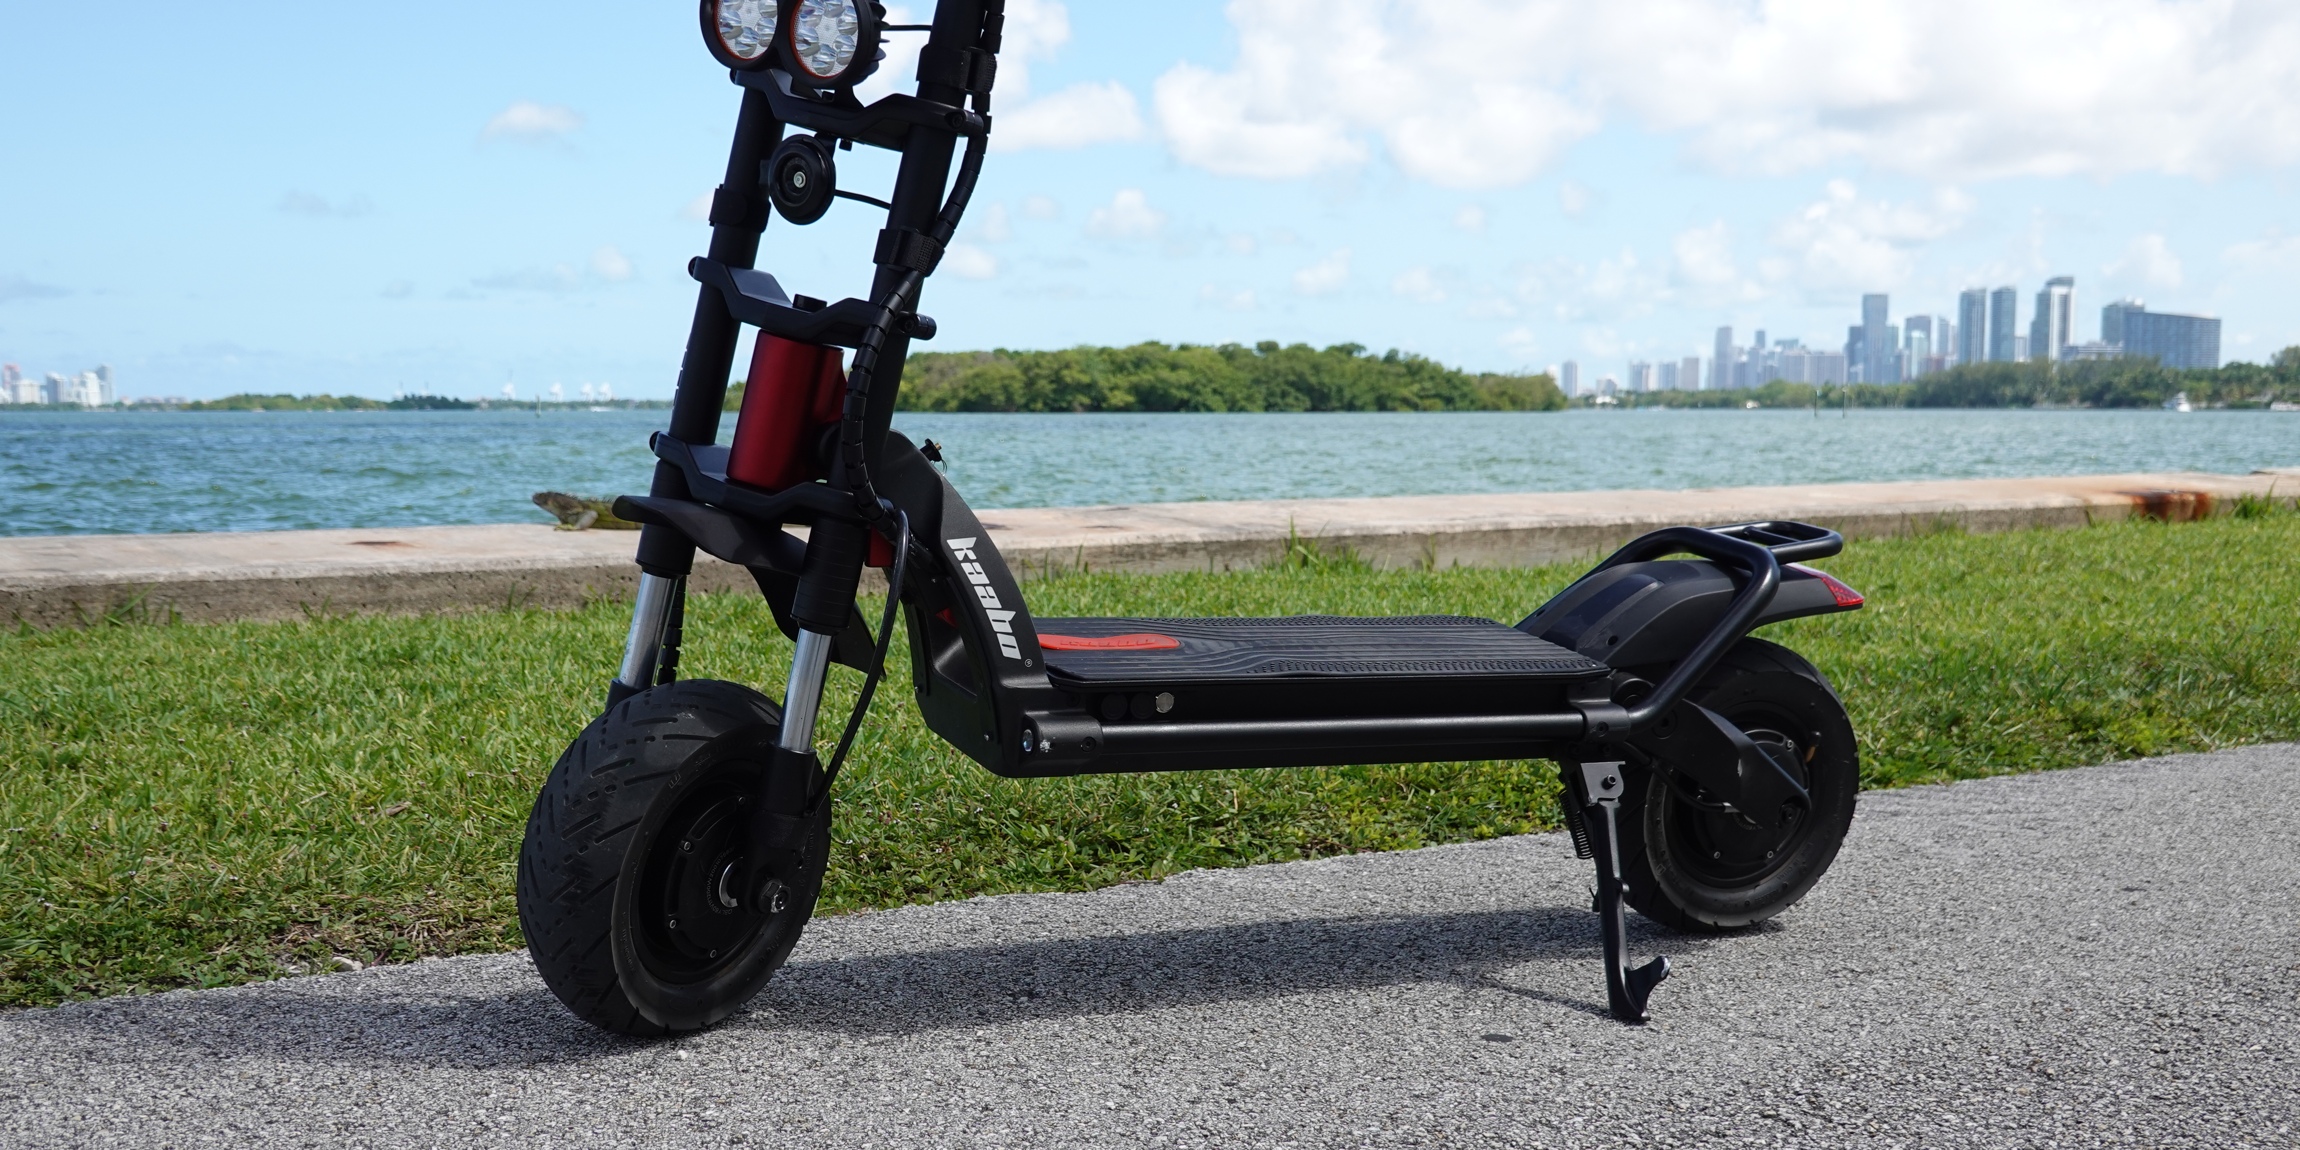 Wolf 50 mph e-scooter review: Most you can have up